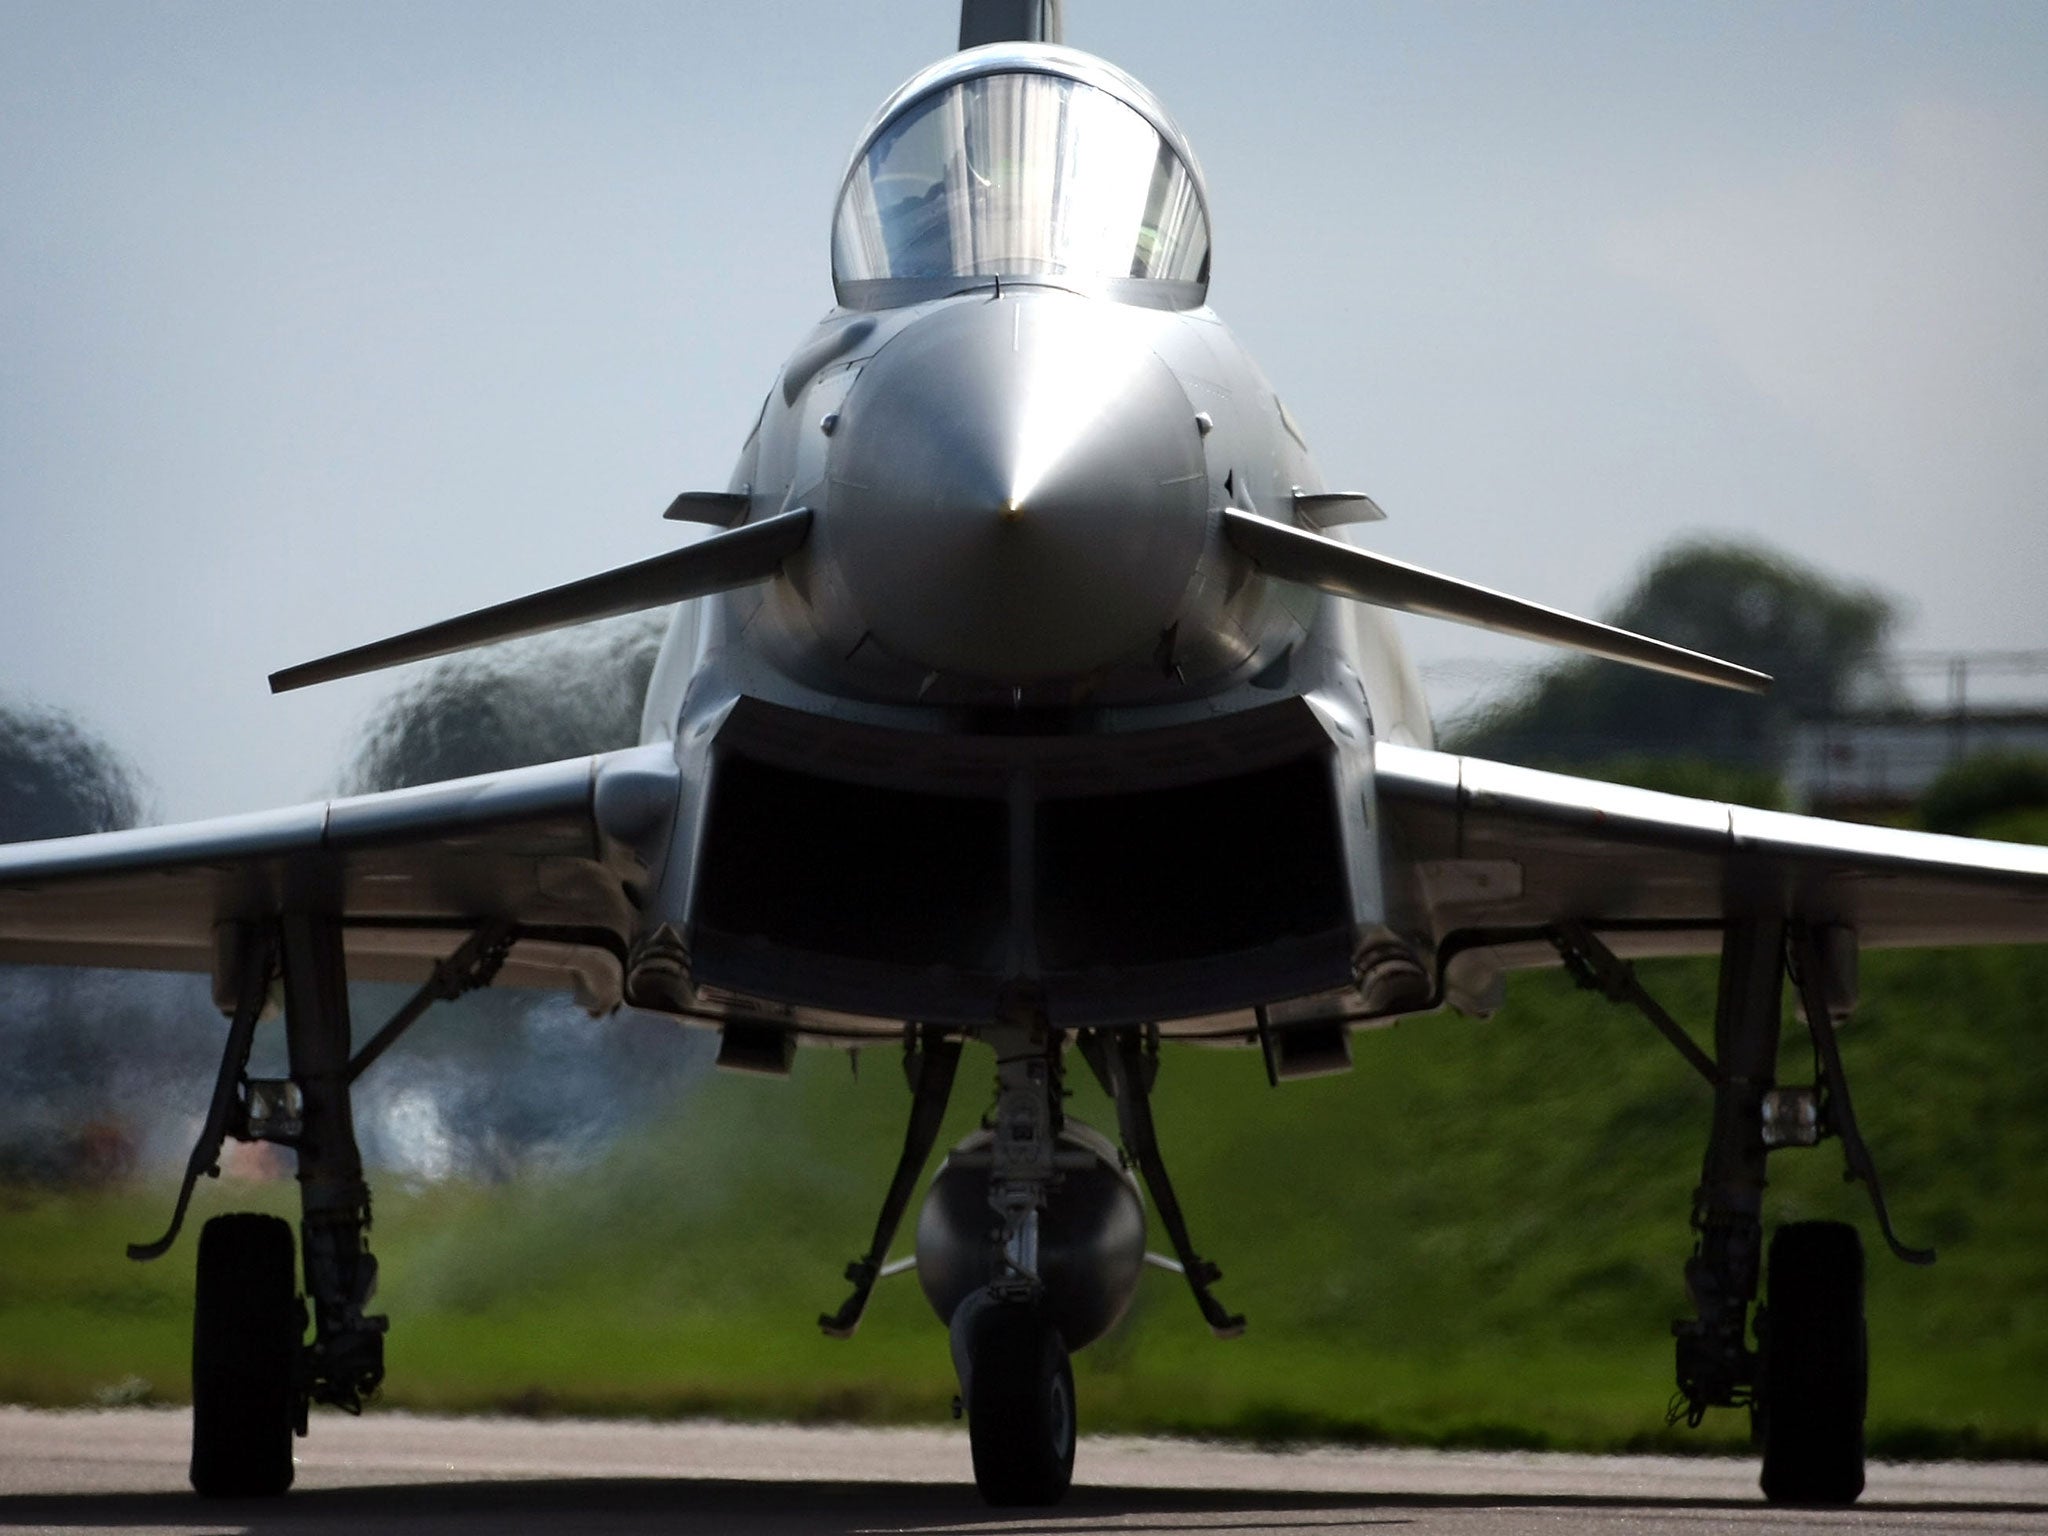 Eurofighter Typhoon jets are among the weapons being sold by Britain internationally